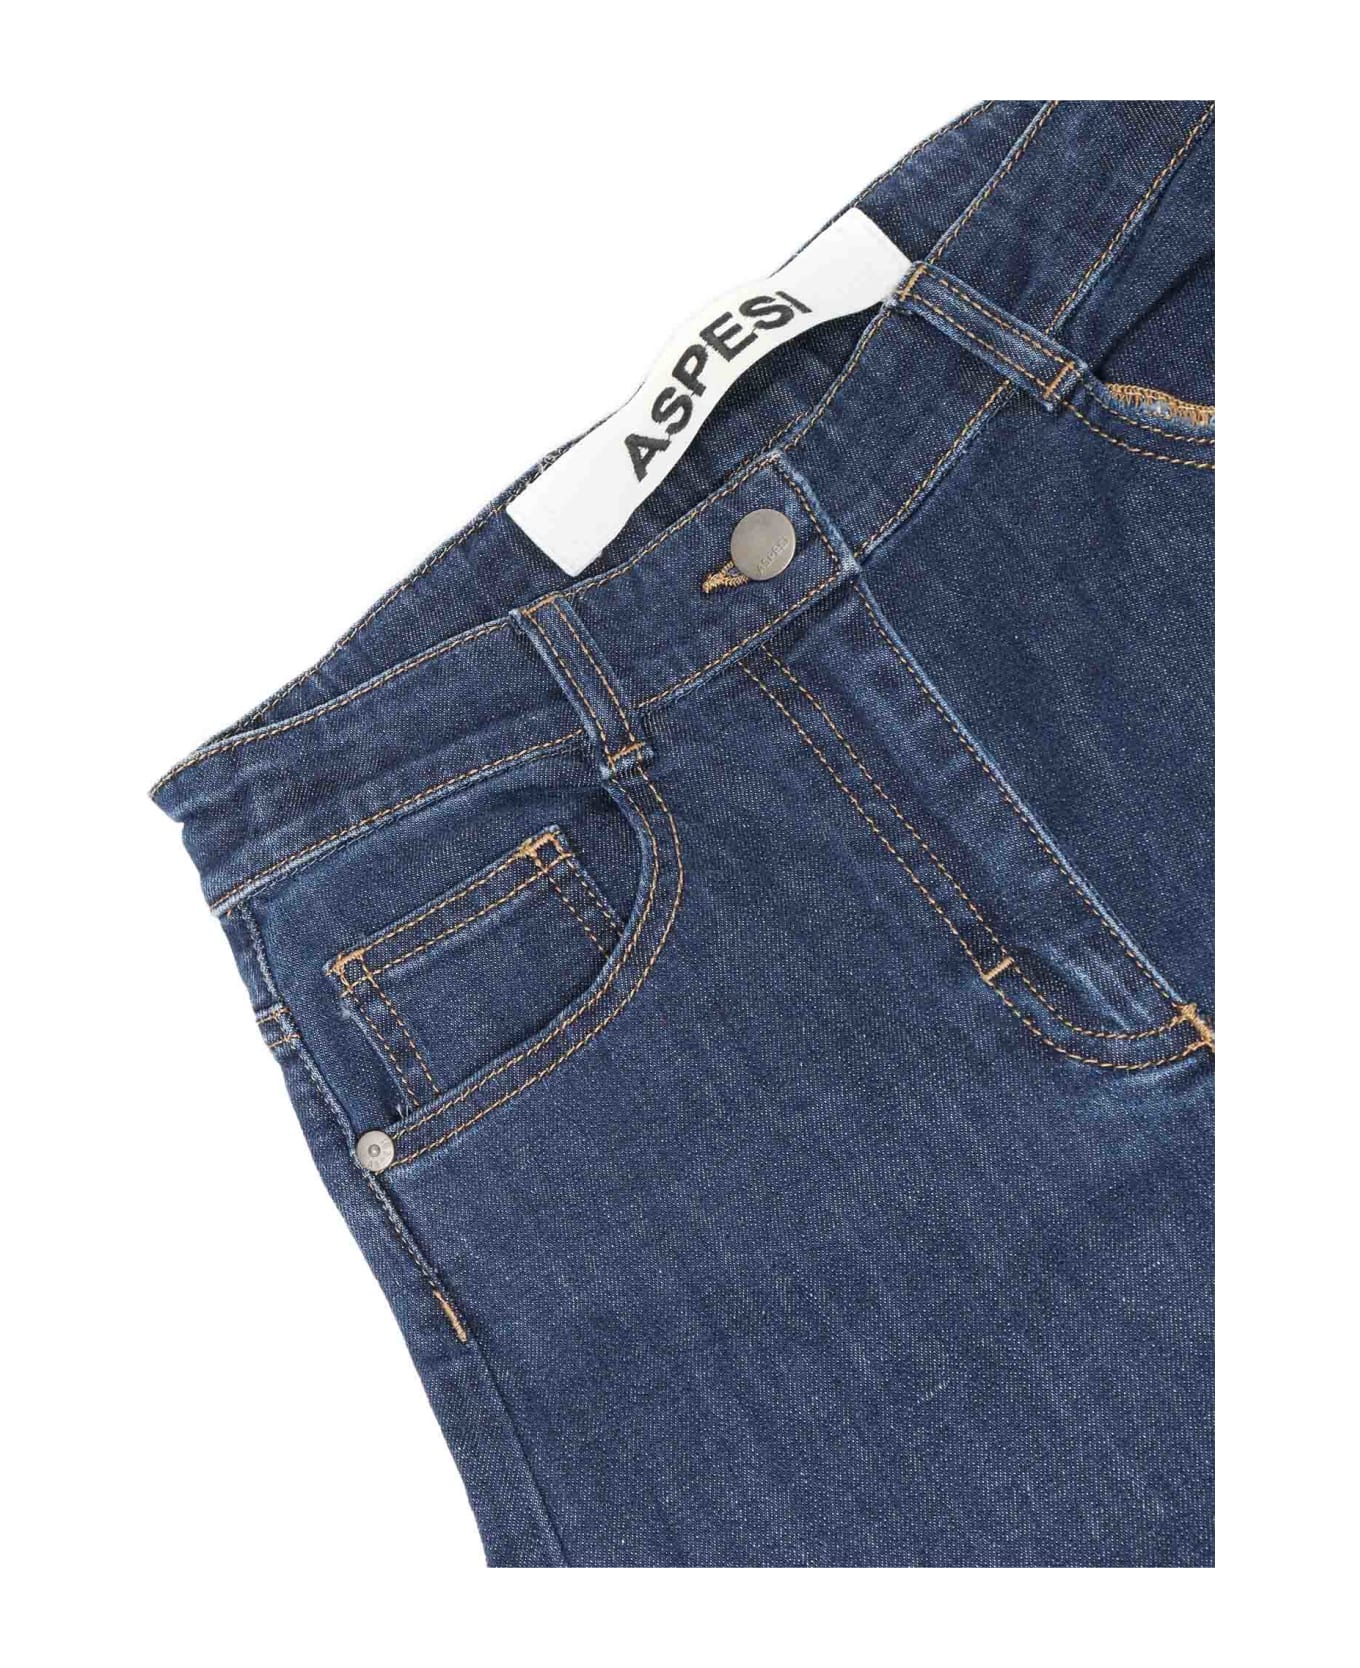 Aspesi Loose Fit Jeans - BLUE ボトムス